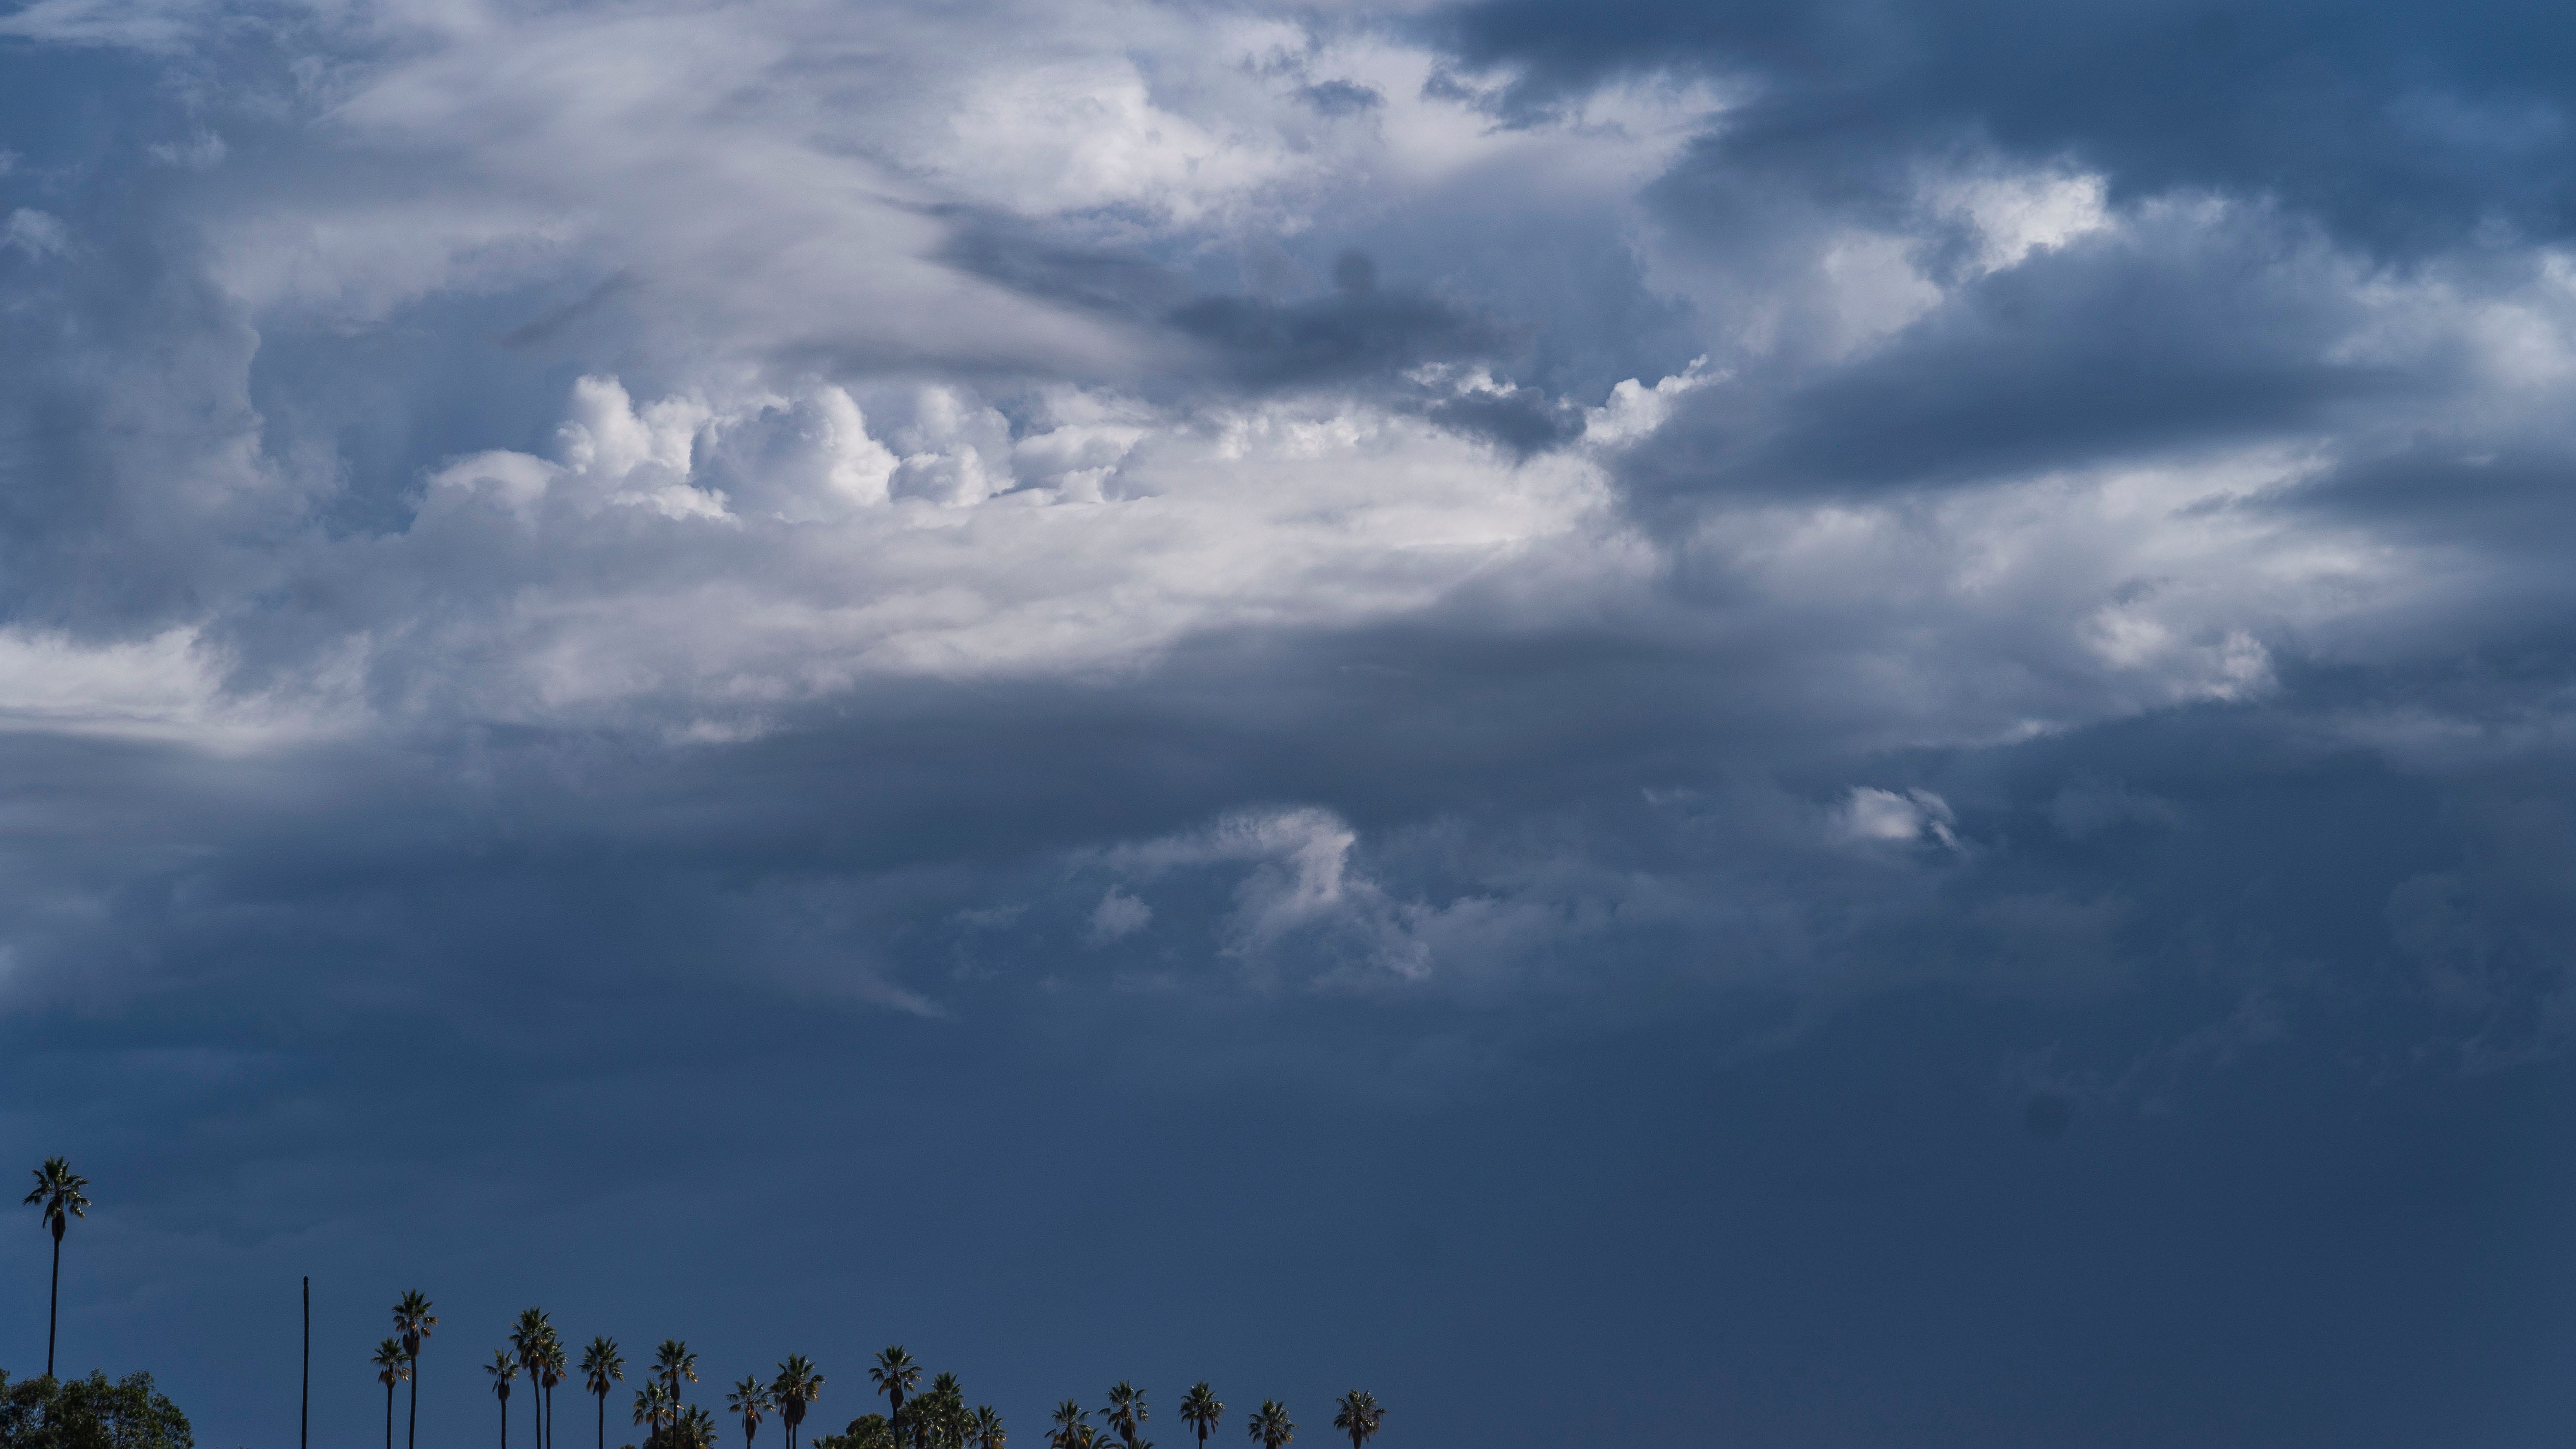 Cloud formations move over Elysian Park overlooking the San Gabriel Mountains in Los Angeles, Wednesday, June 22, 2022.